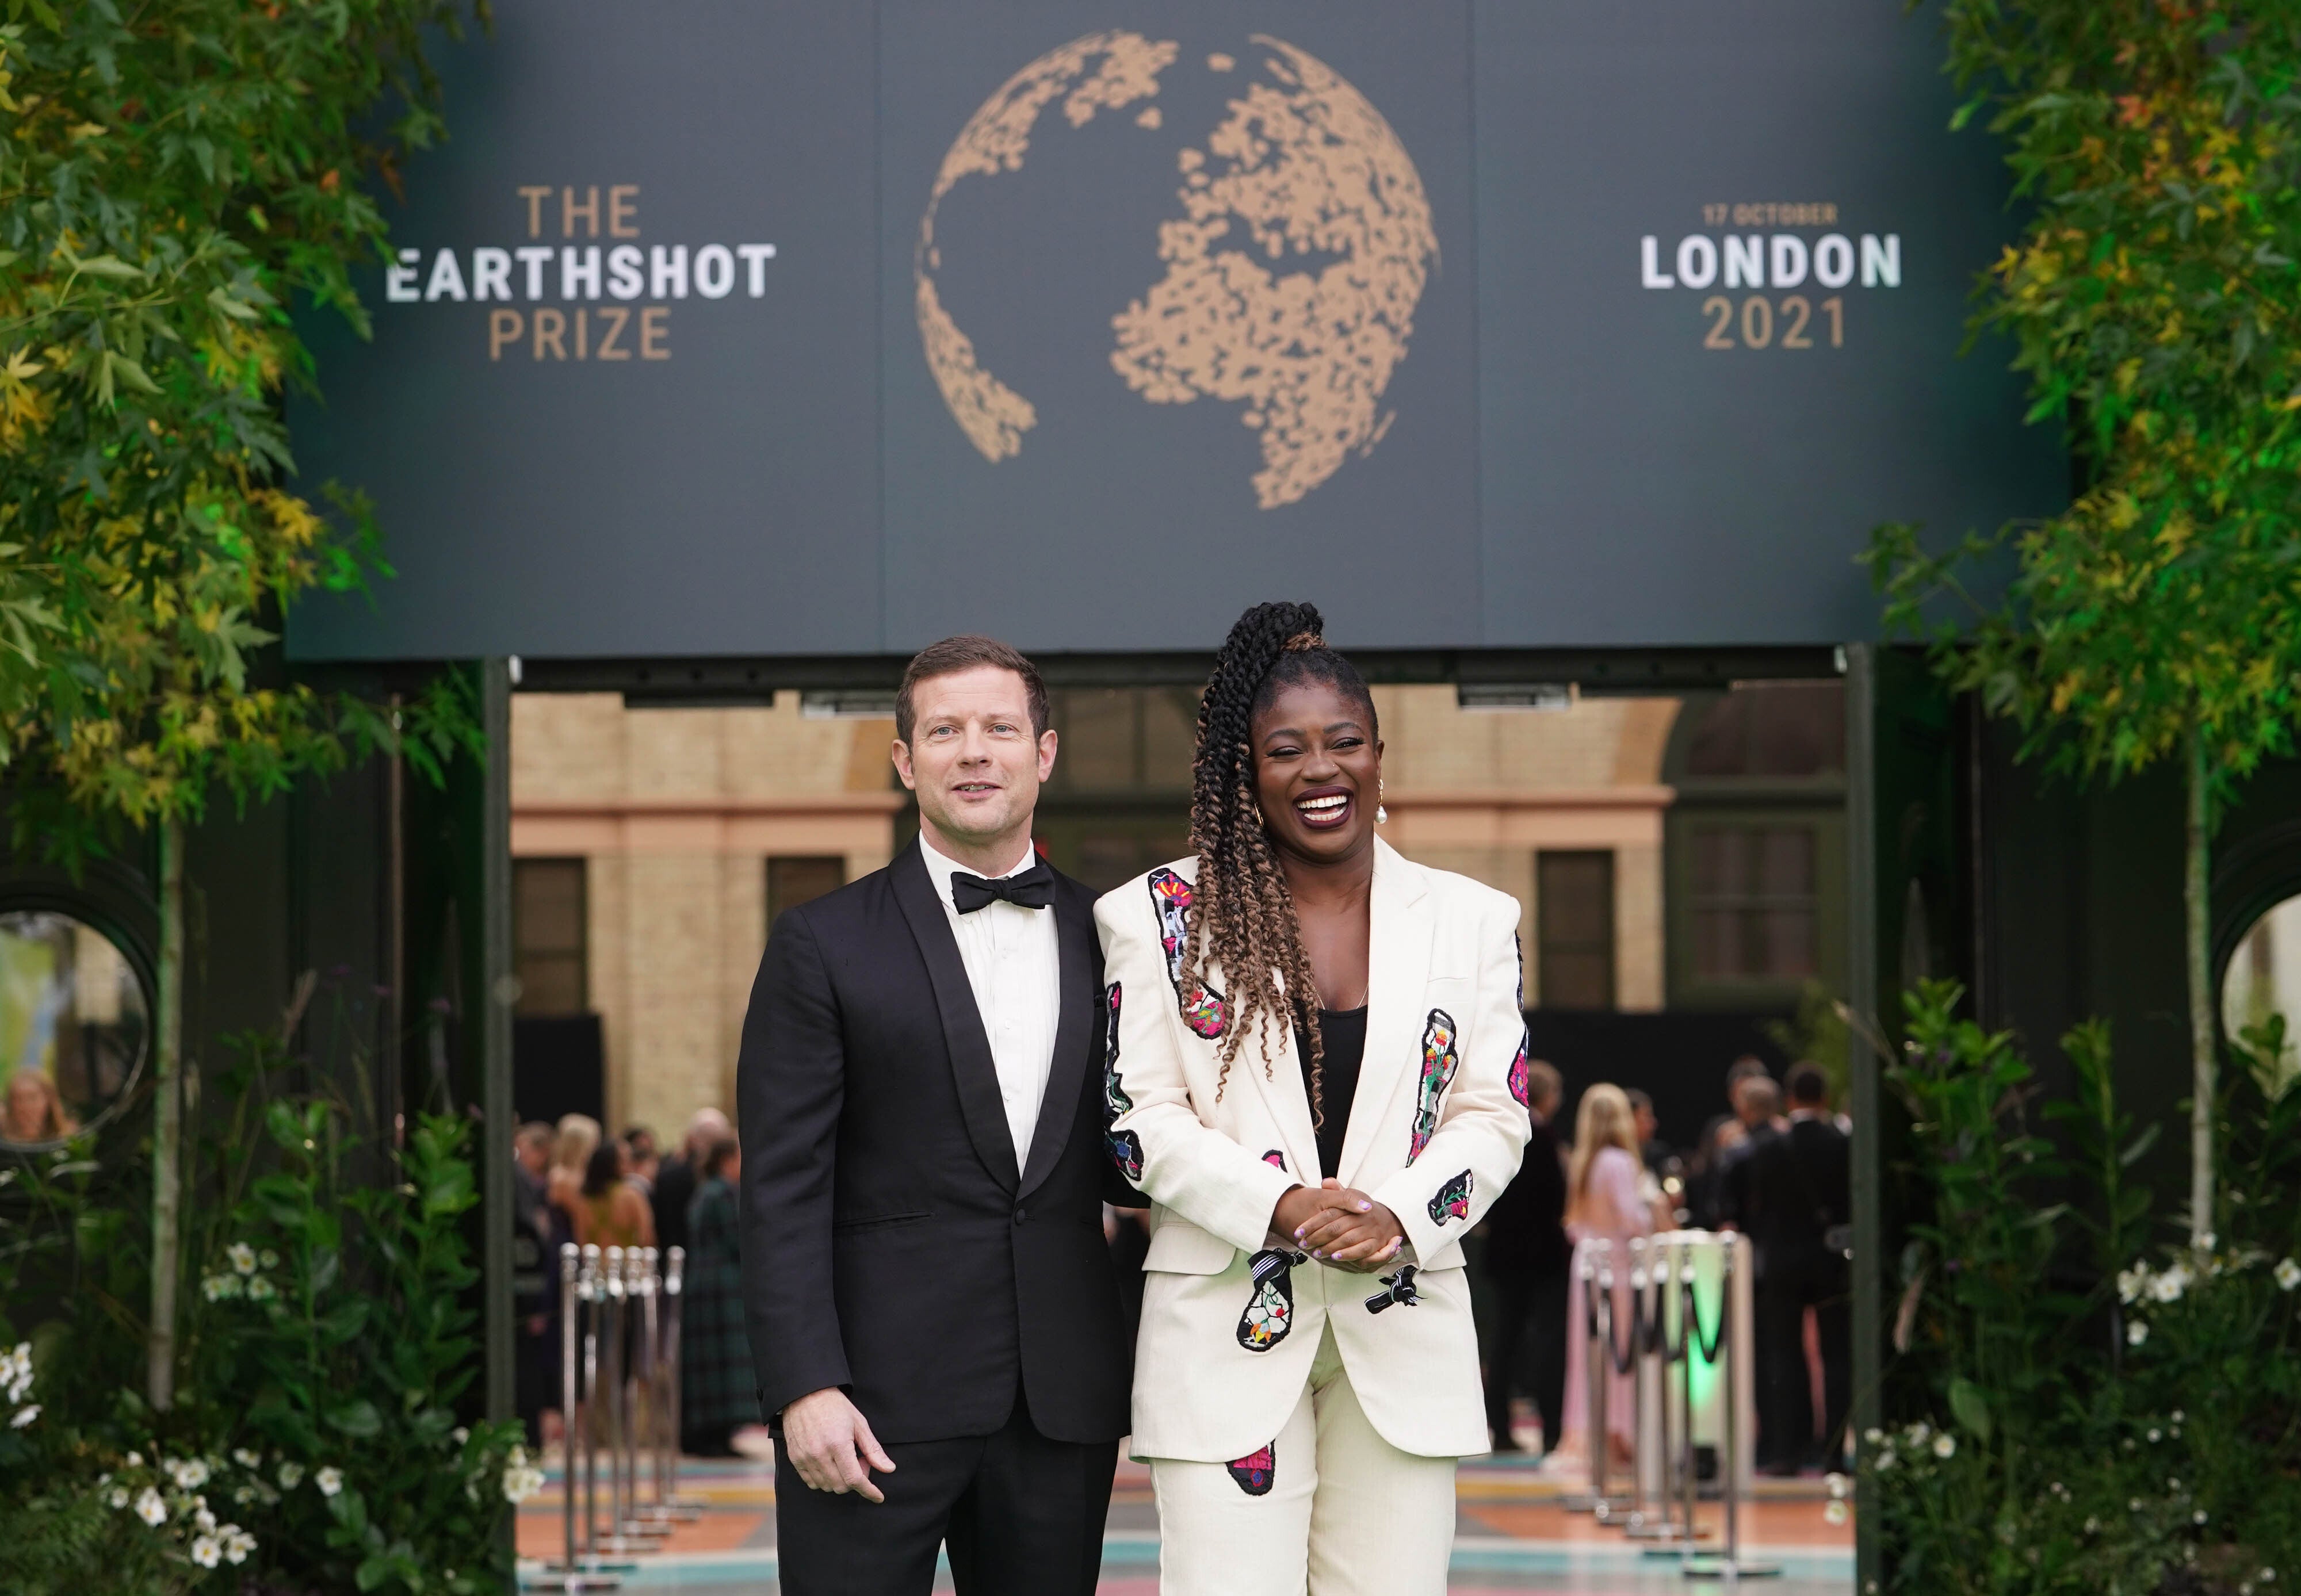 Dermot O’Leary and Clara Amfo presented the Earthshot Prize awards ceremony last year (Dominic Lipinski/PA)